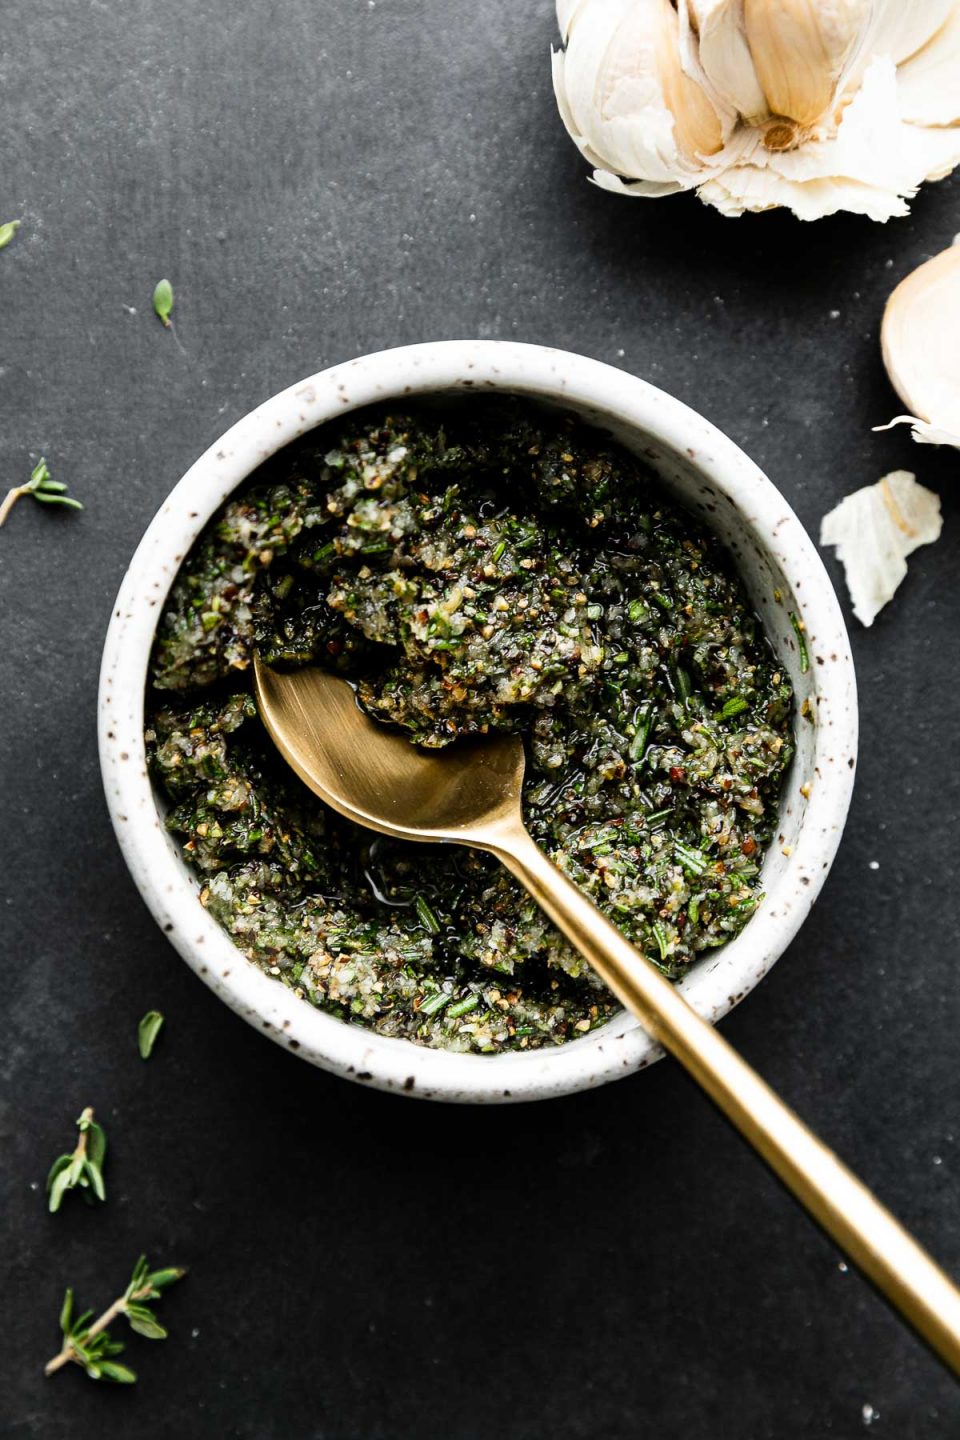 Garlic herb rub for Garlic & Herb Prime Rib fills a small ceramic bowl. A Golden spoon rests inside of the bowl and the bowl sits atop a dark textured surface. Cloves of garlic and pieces of fresh thyme rest alongside the bowl.